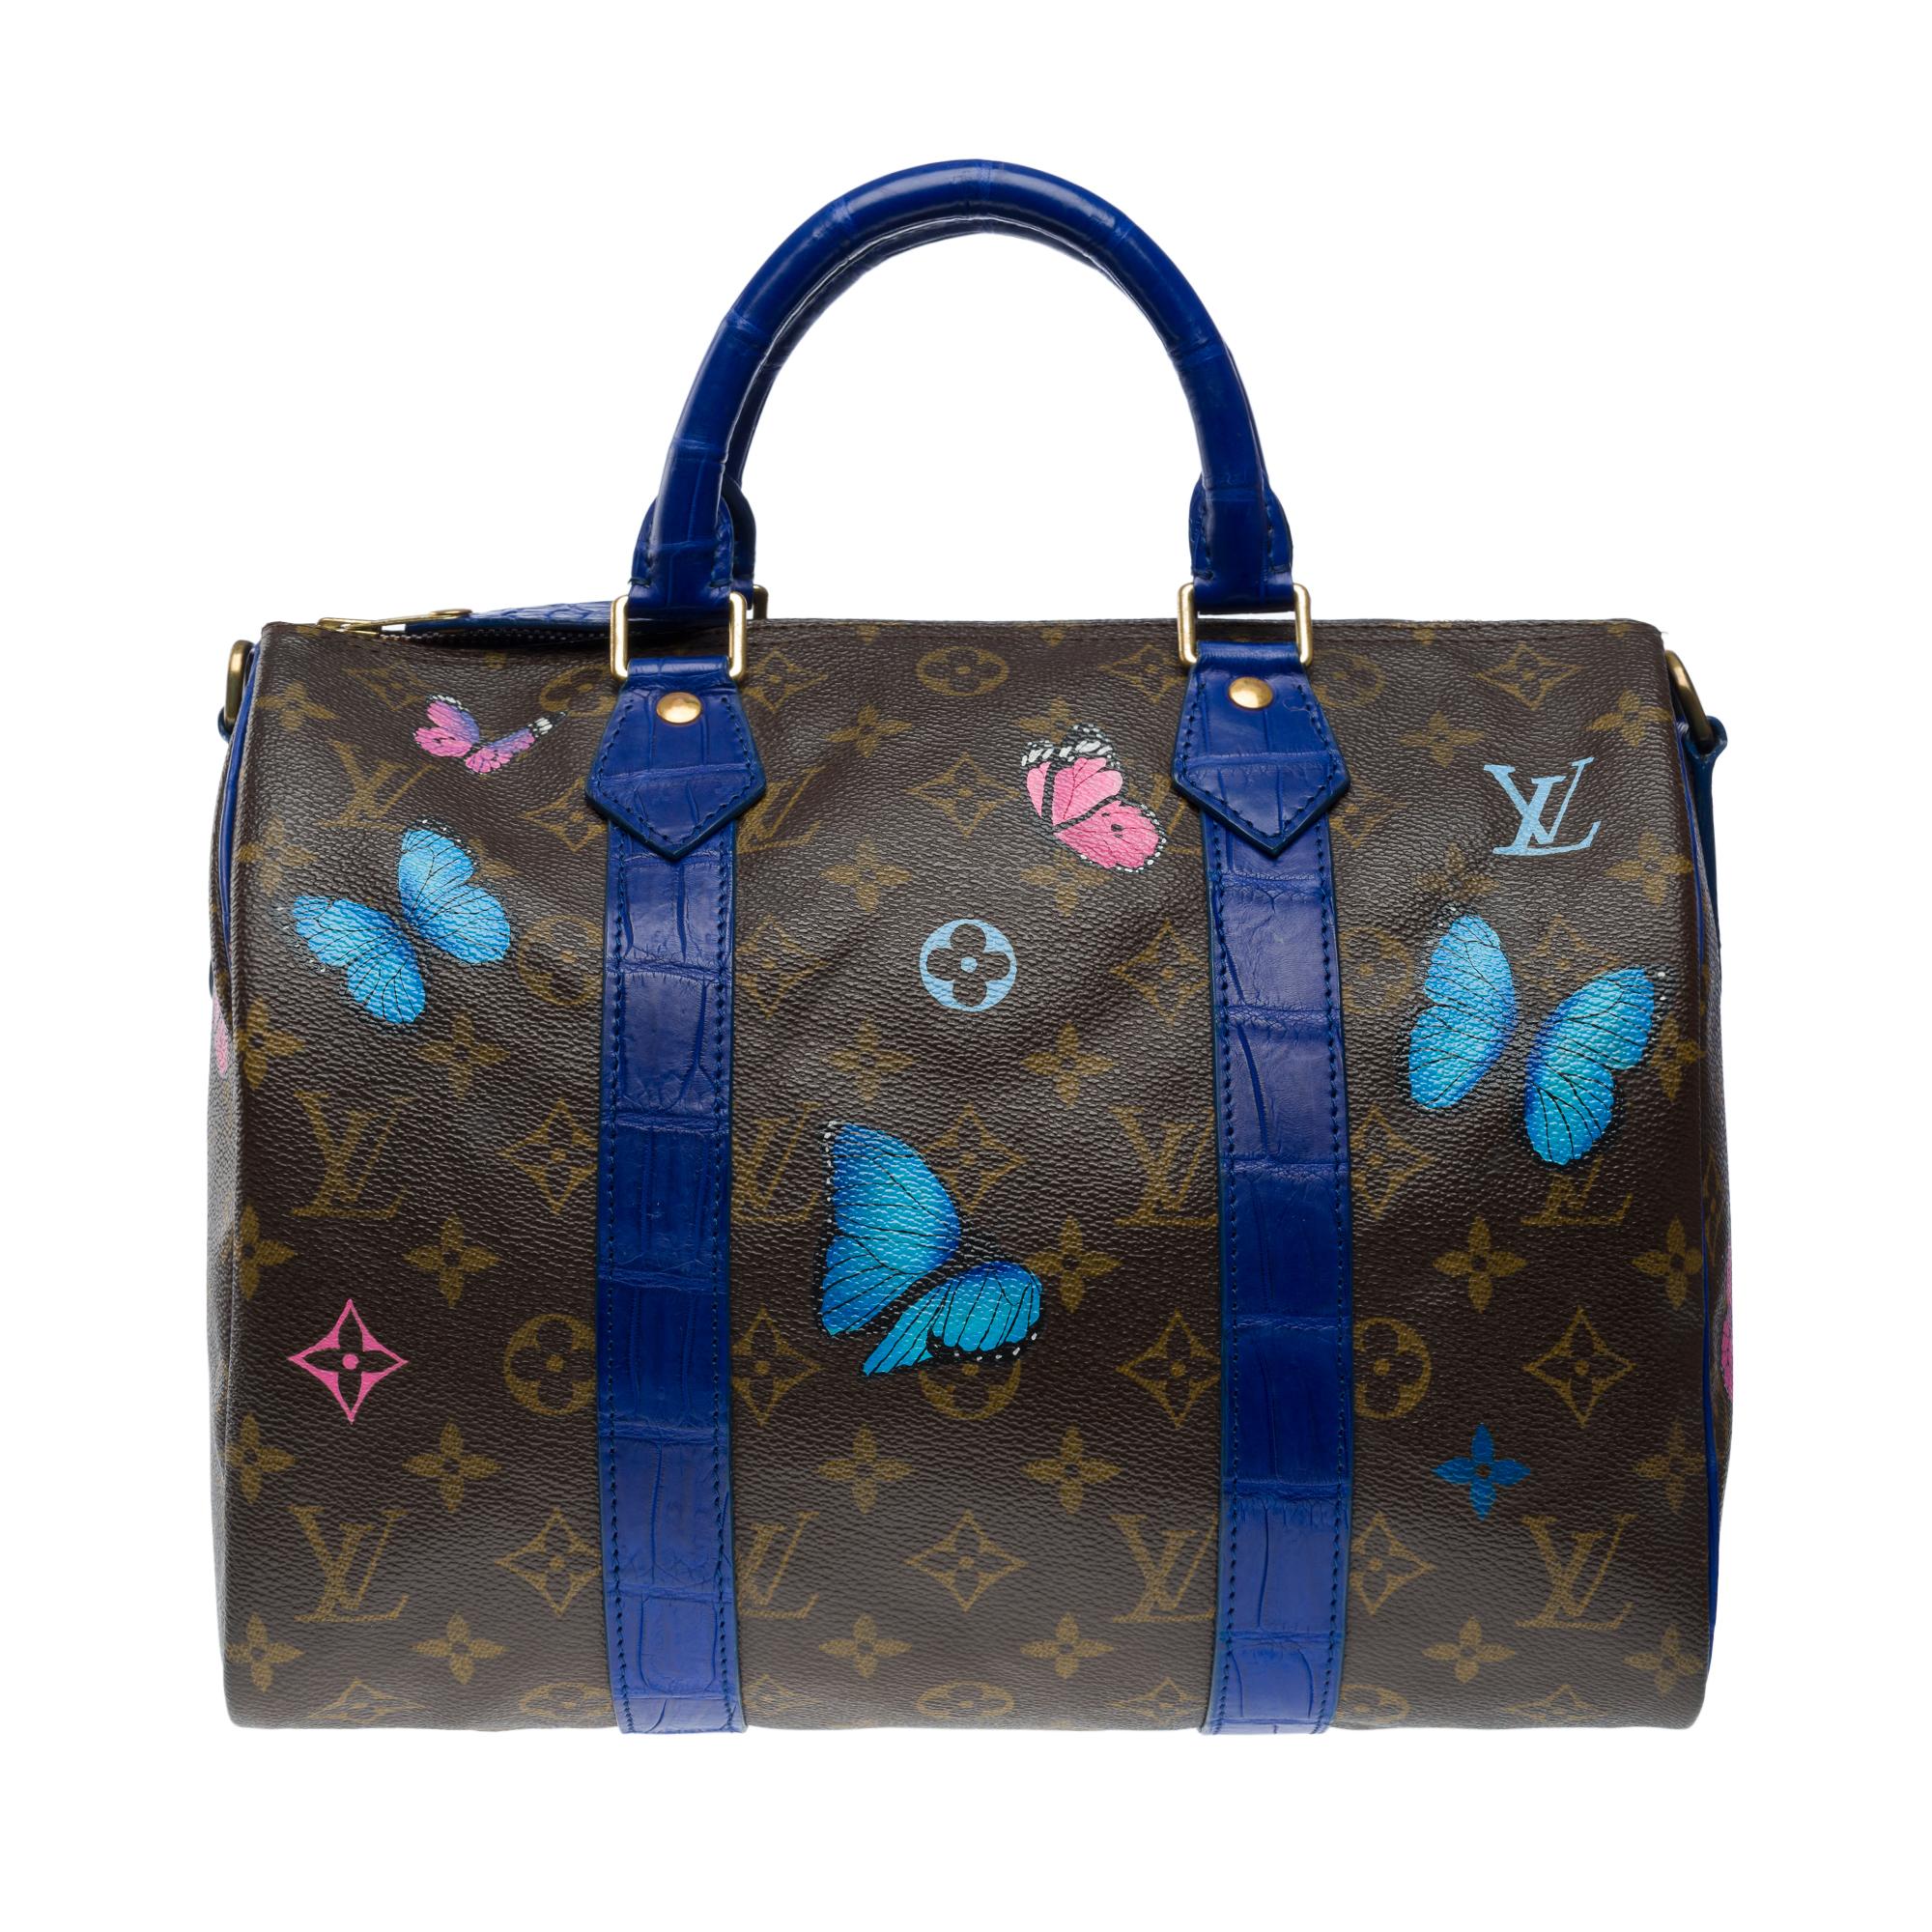 Exceptional​ ​and​ ​Unique​ ​Louis​ ​Vuitton​ ​Speedy​ ​30​ ​handbag​ ​in​ ​brown​ ​monogram​ ​coated​ ​canvas​ ​customized​ ​with​ ​butterfly​ ​patterns​ ​and​ ​genuine​ ​blue​ ​Porosus​ ​crocodile​ ​leather​ ​with​ ​handles​ ​and​ ​on​ ​the​